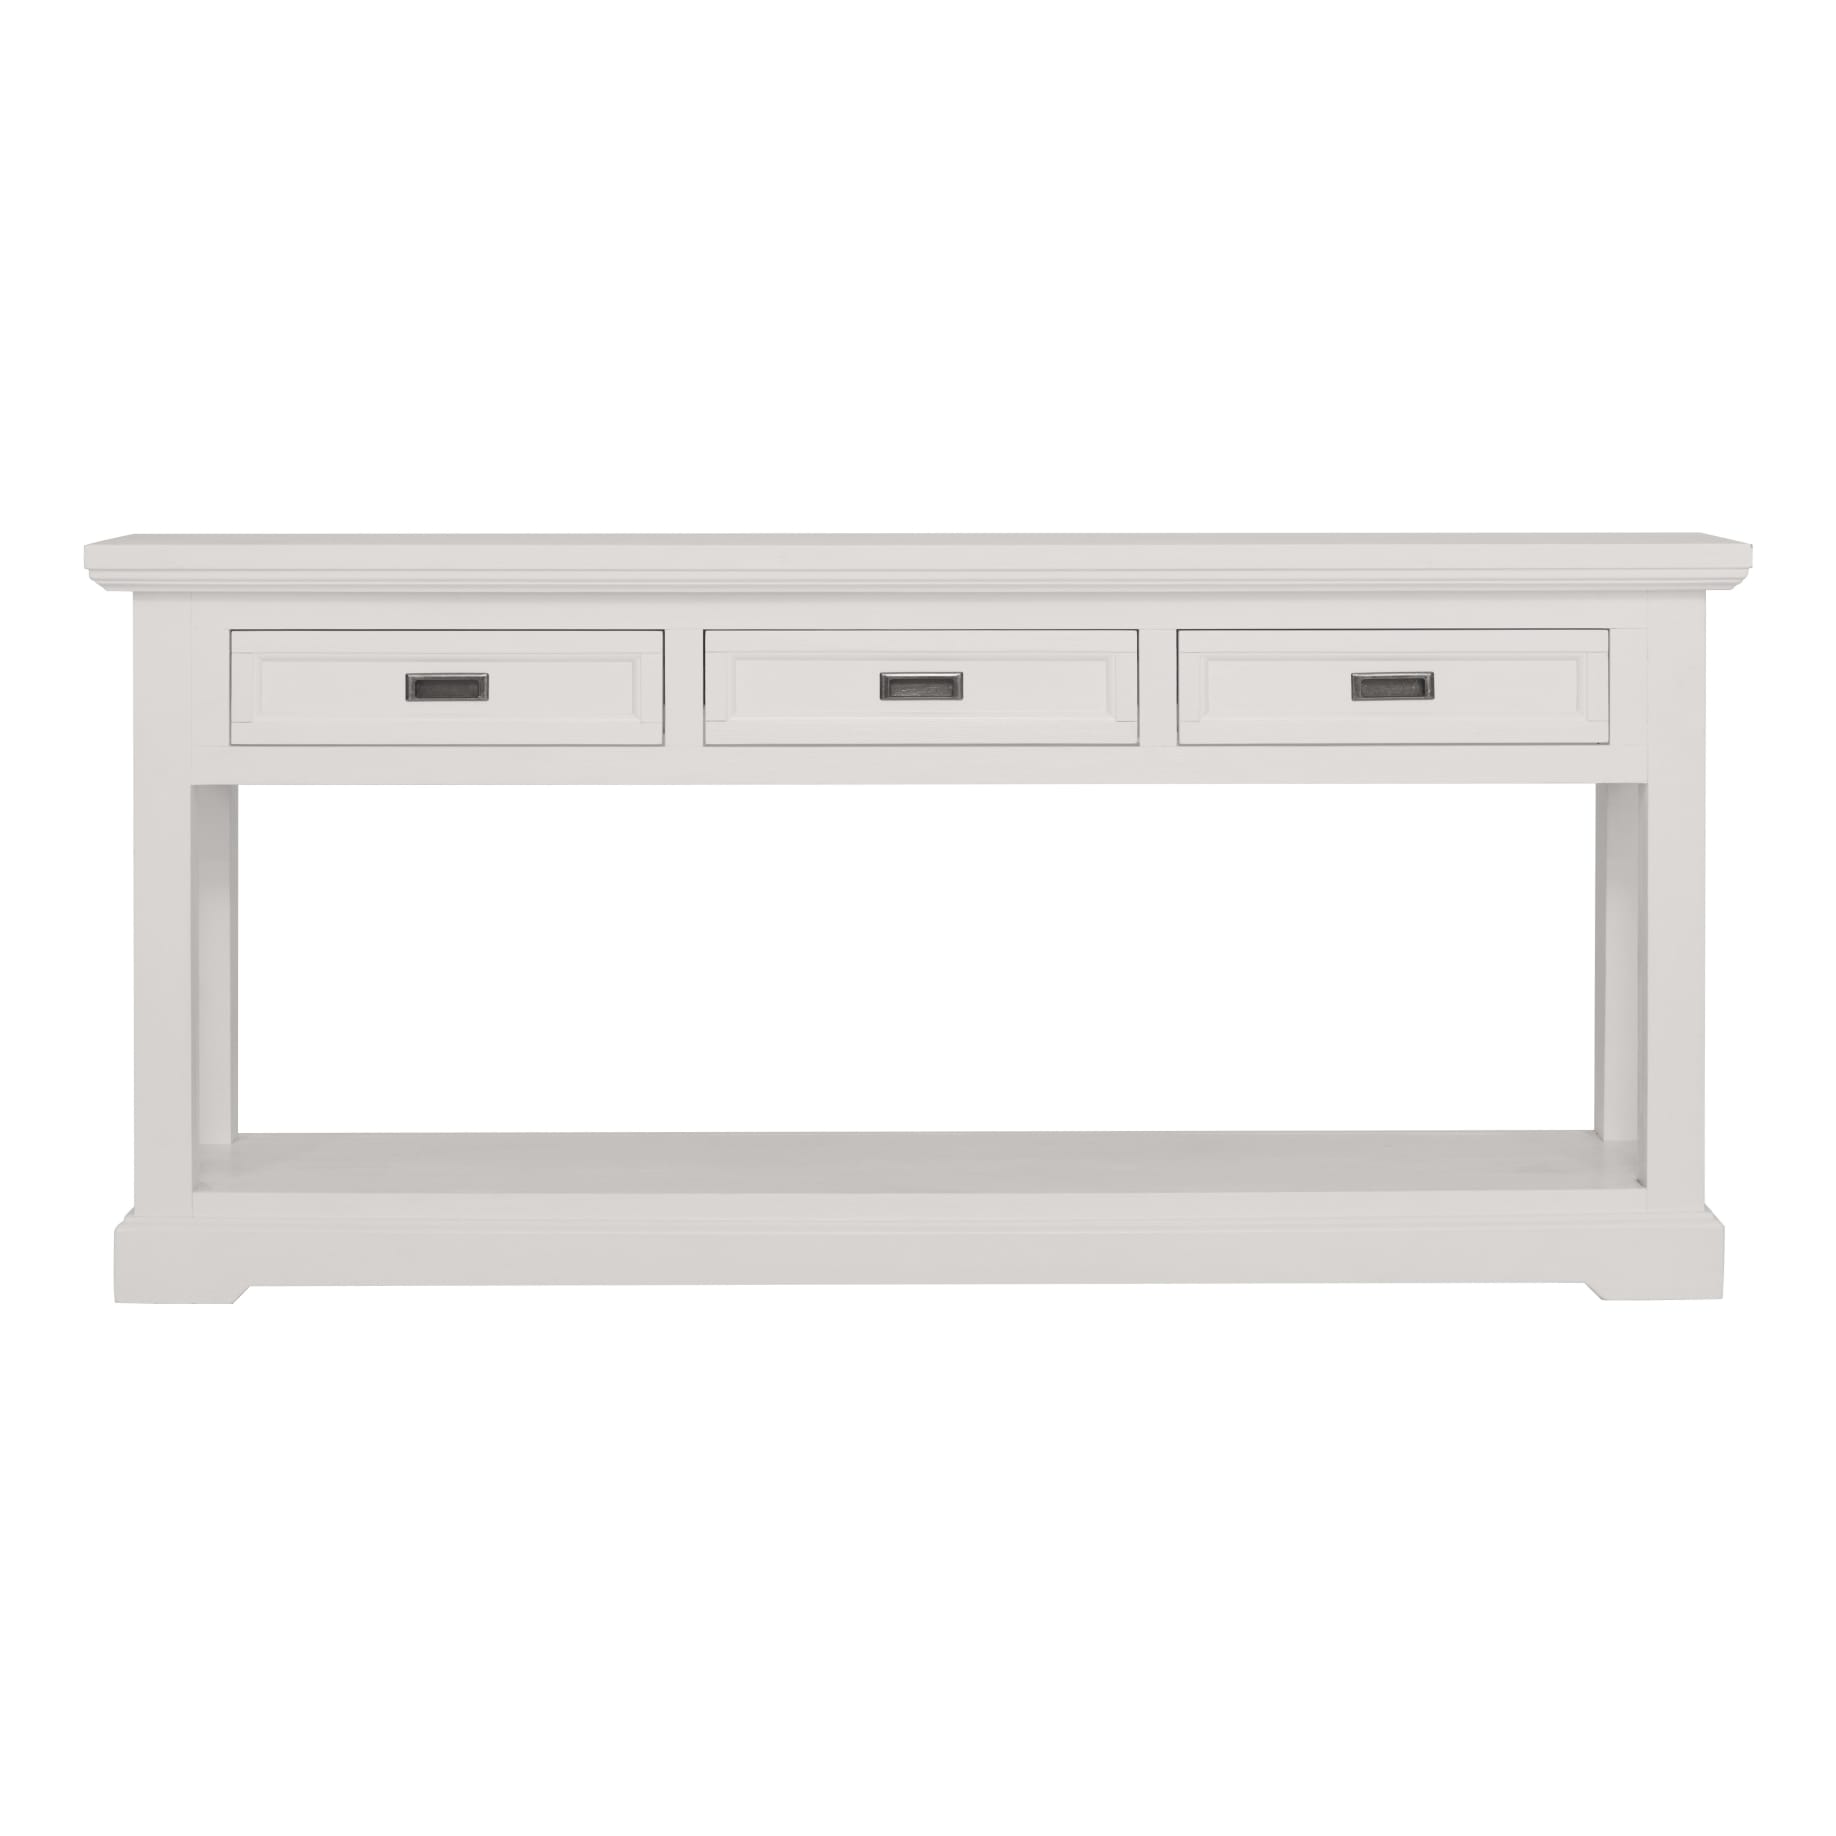 Hamptons Console Table 3 Drawer in White